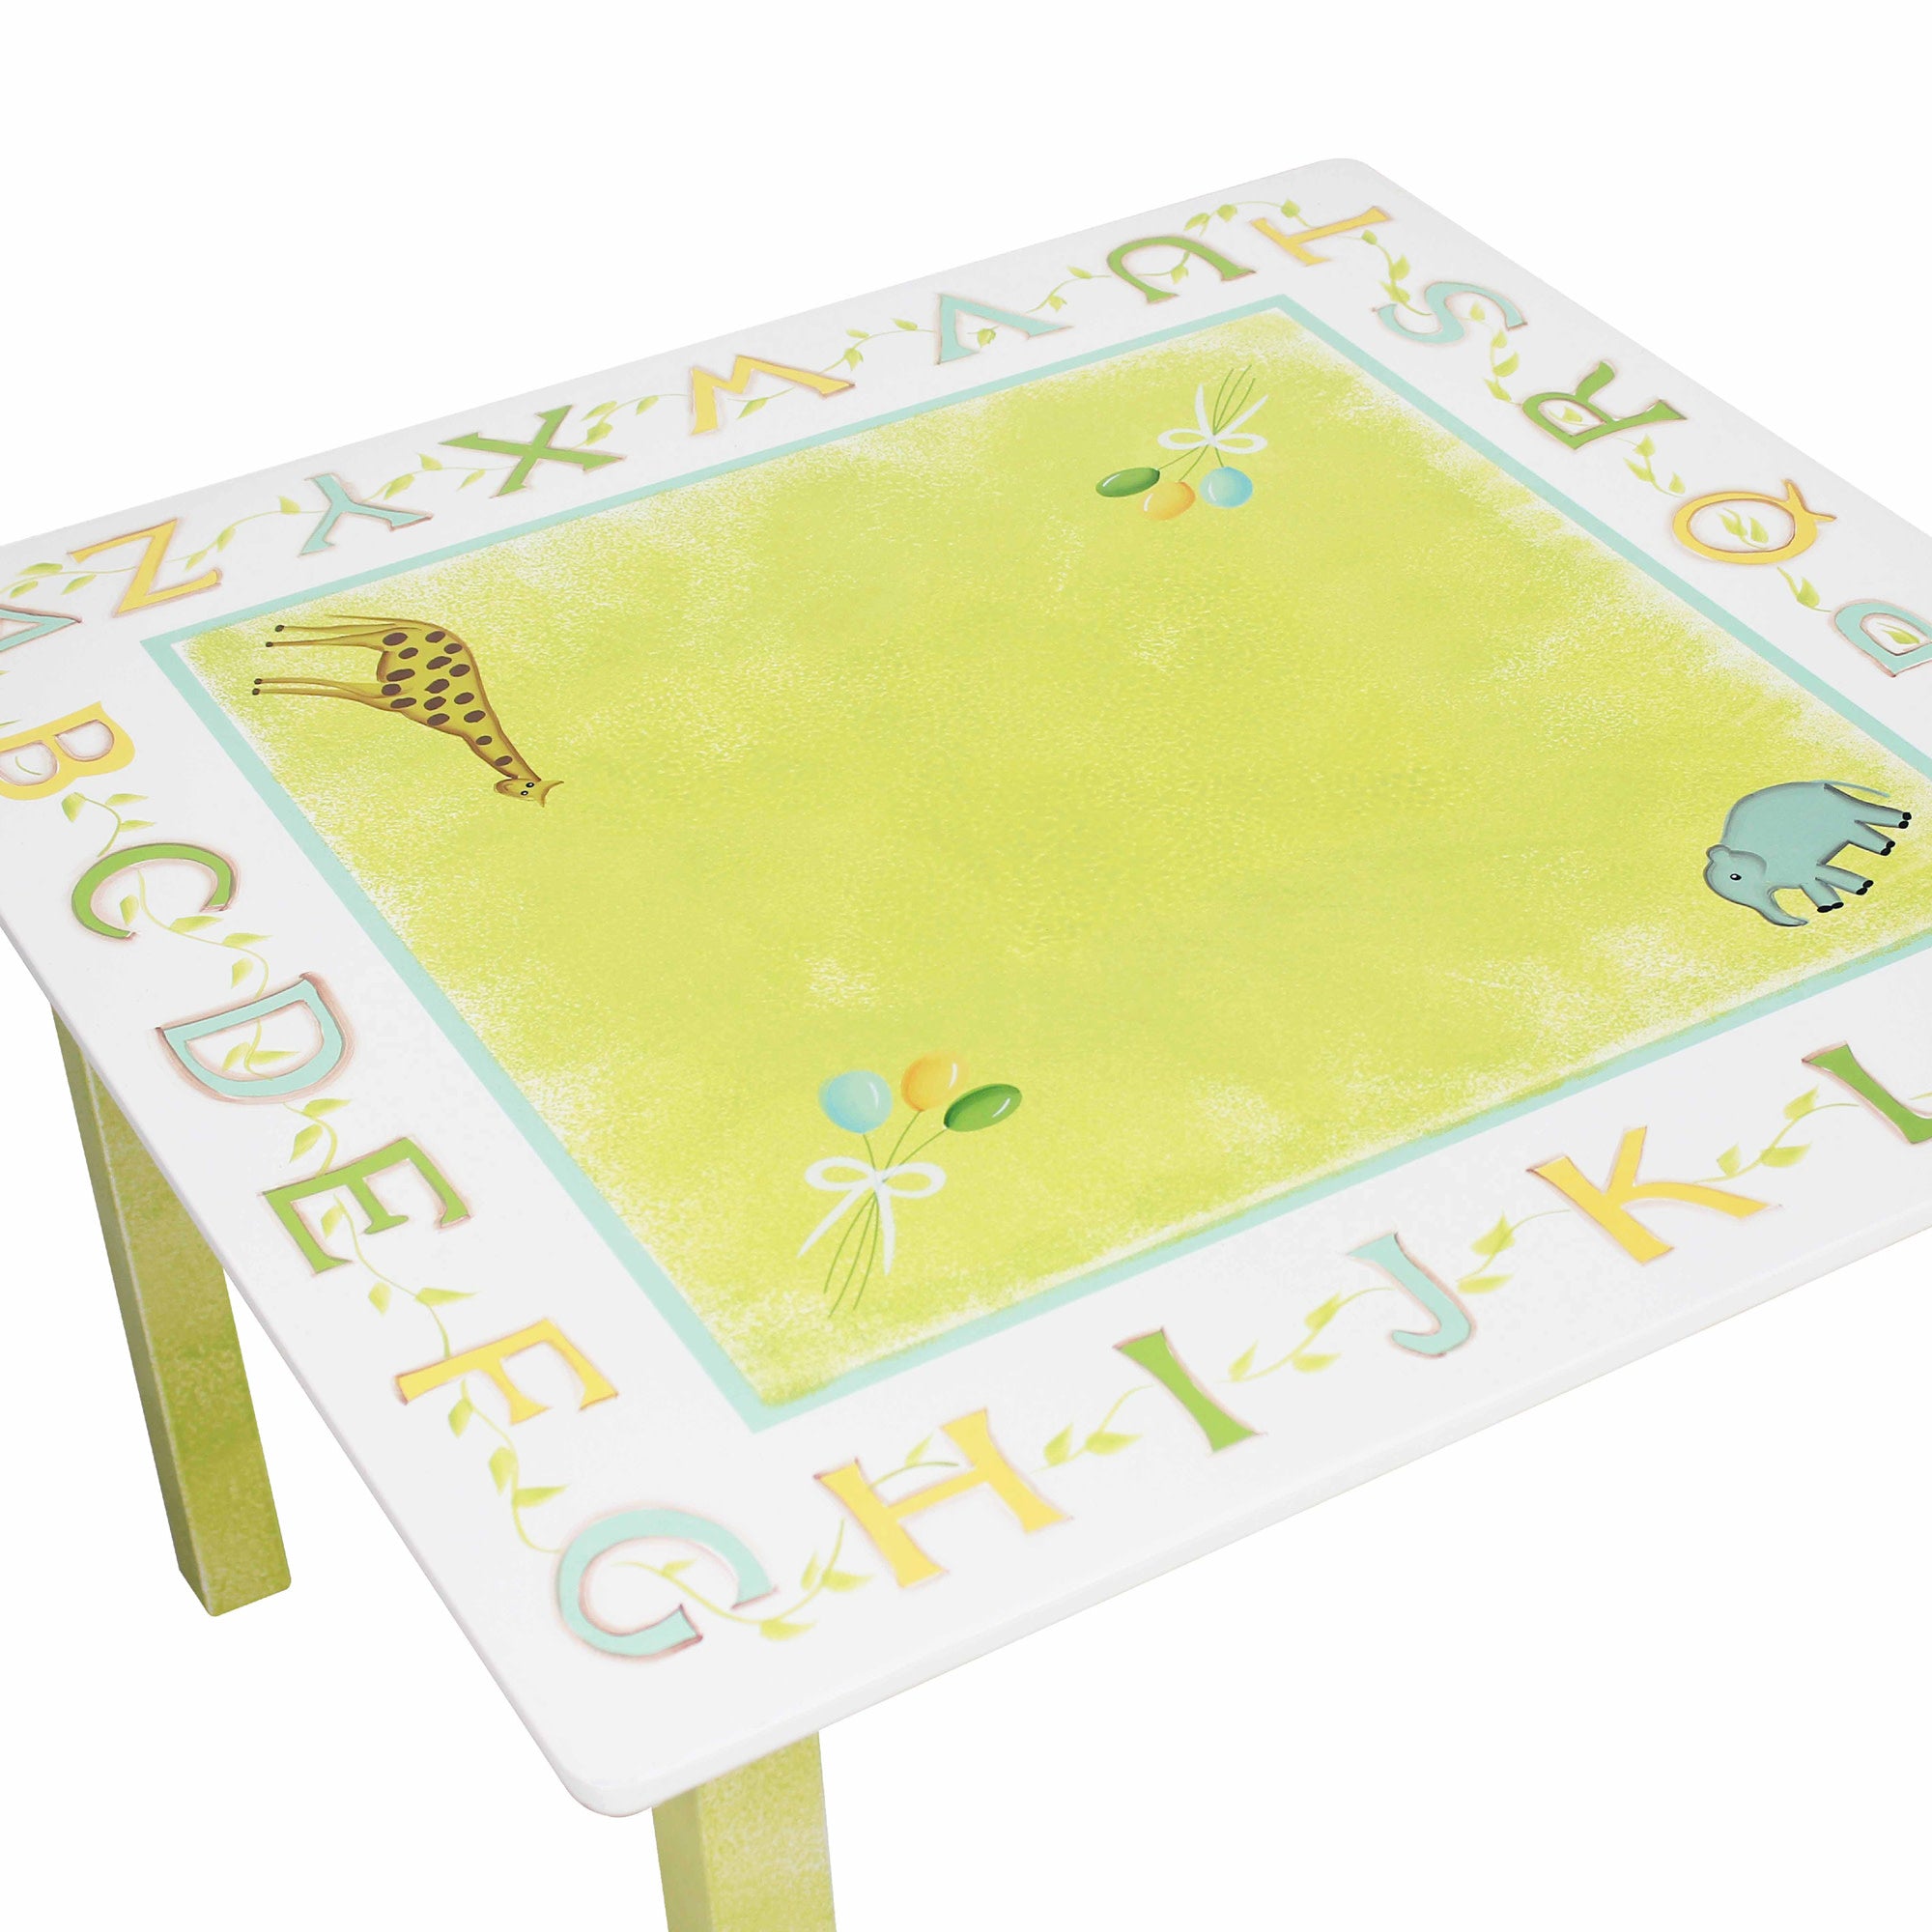 Fantasy Fields Toy Furniture Alphabet Table with Hand-Painted ABC Border, Giraffe, Elephant, & Striped Apron for Boys & Girls, White/Green